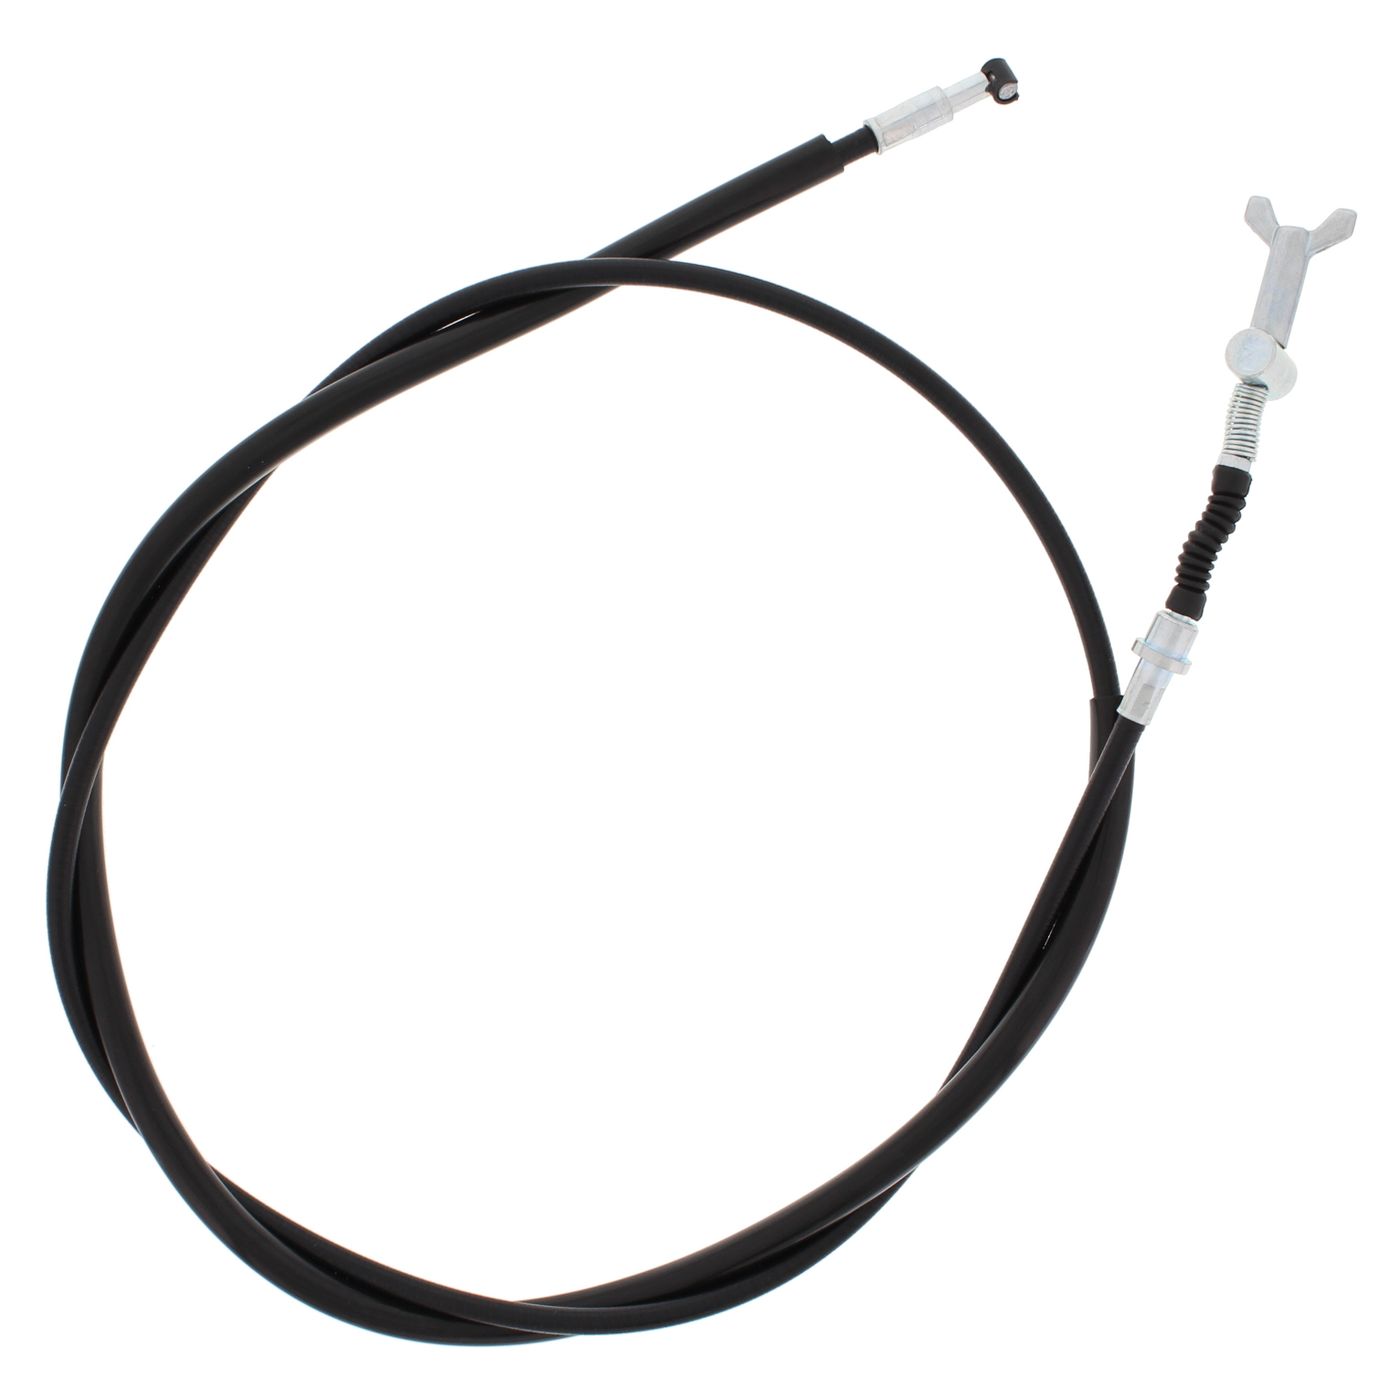 Wrp Brake Cables - WRP454020 image